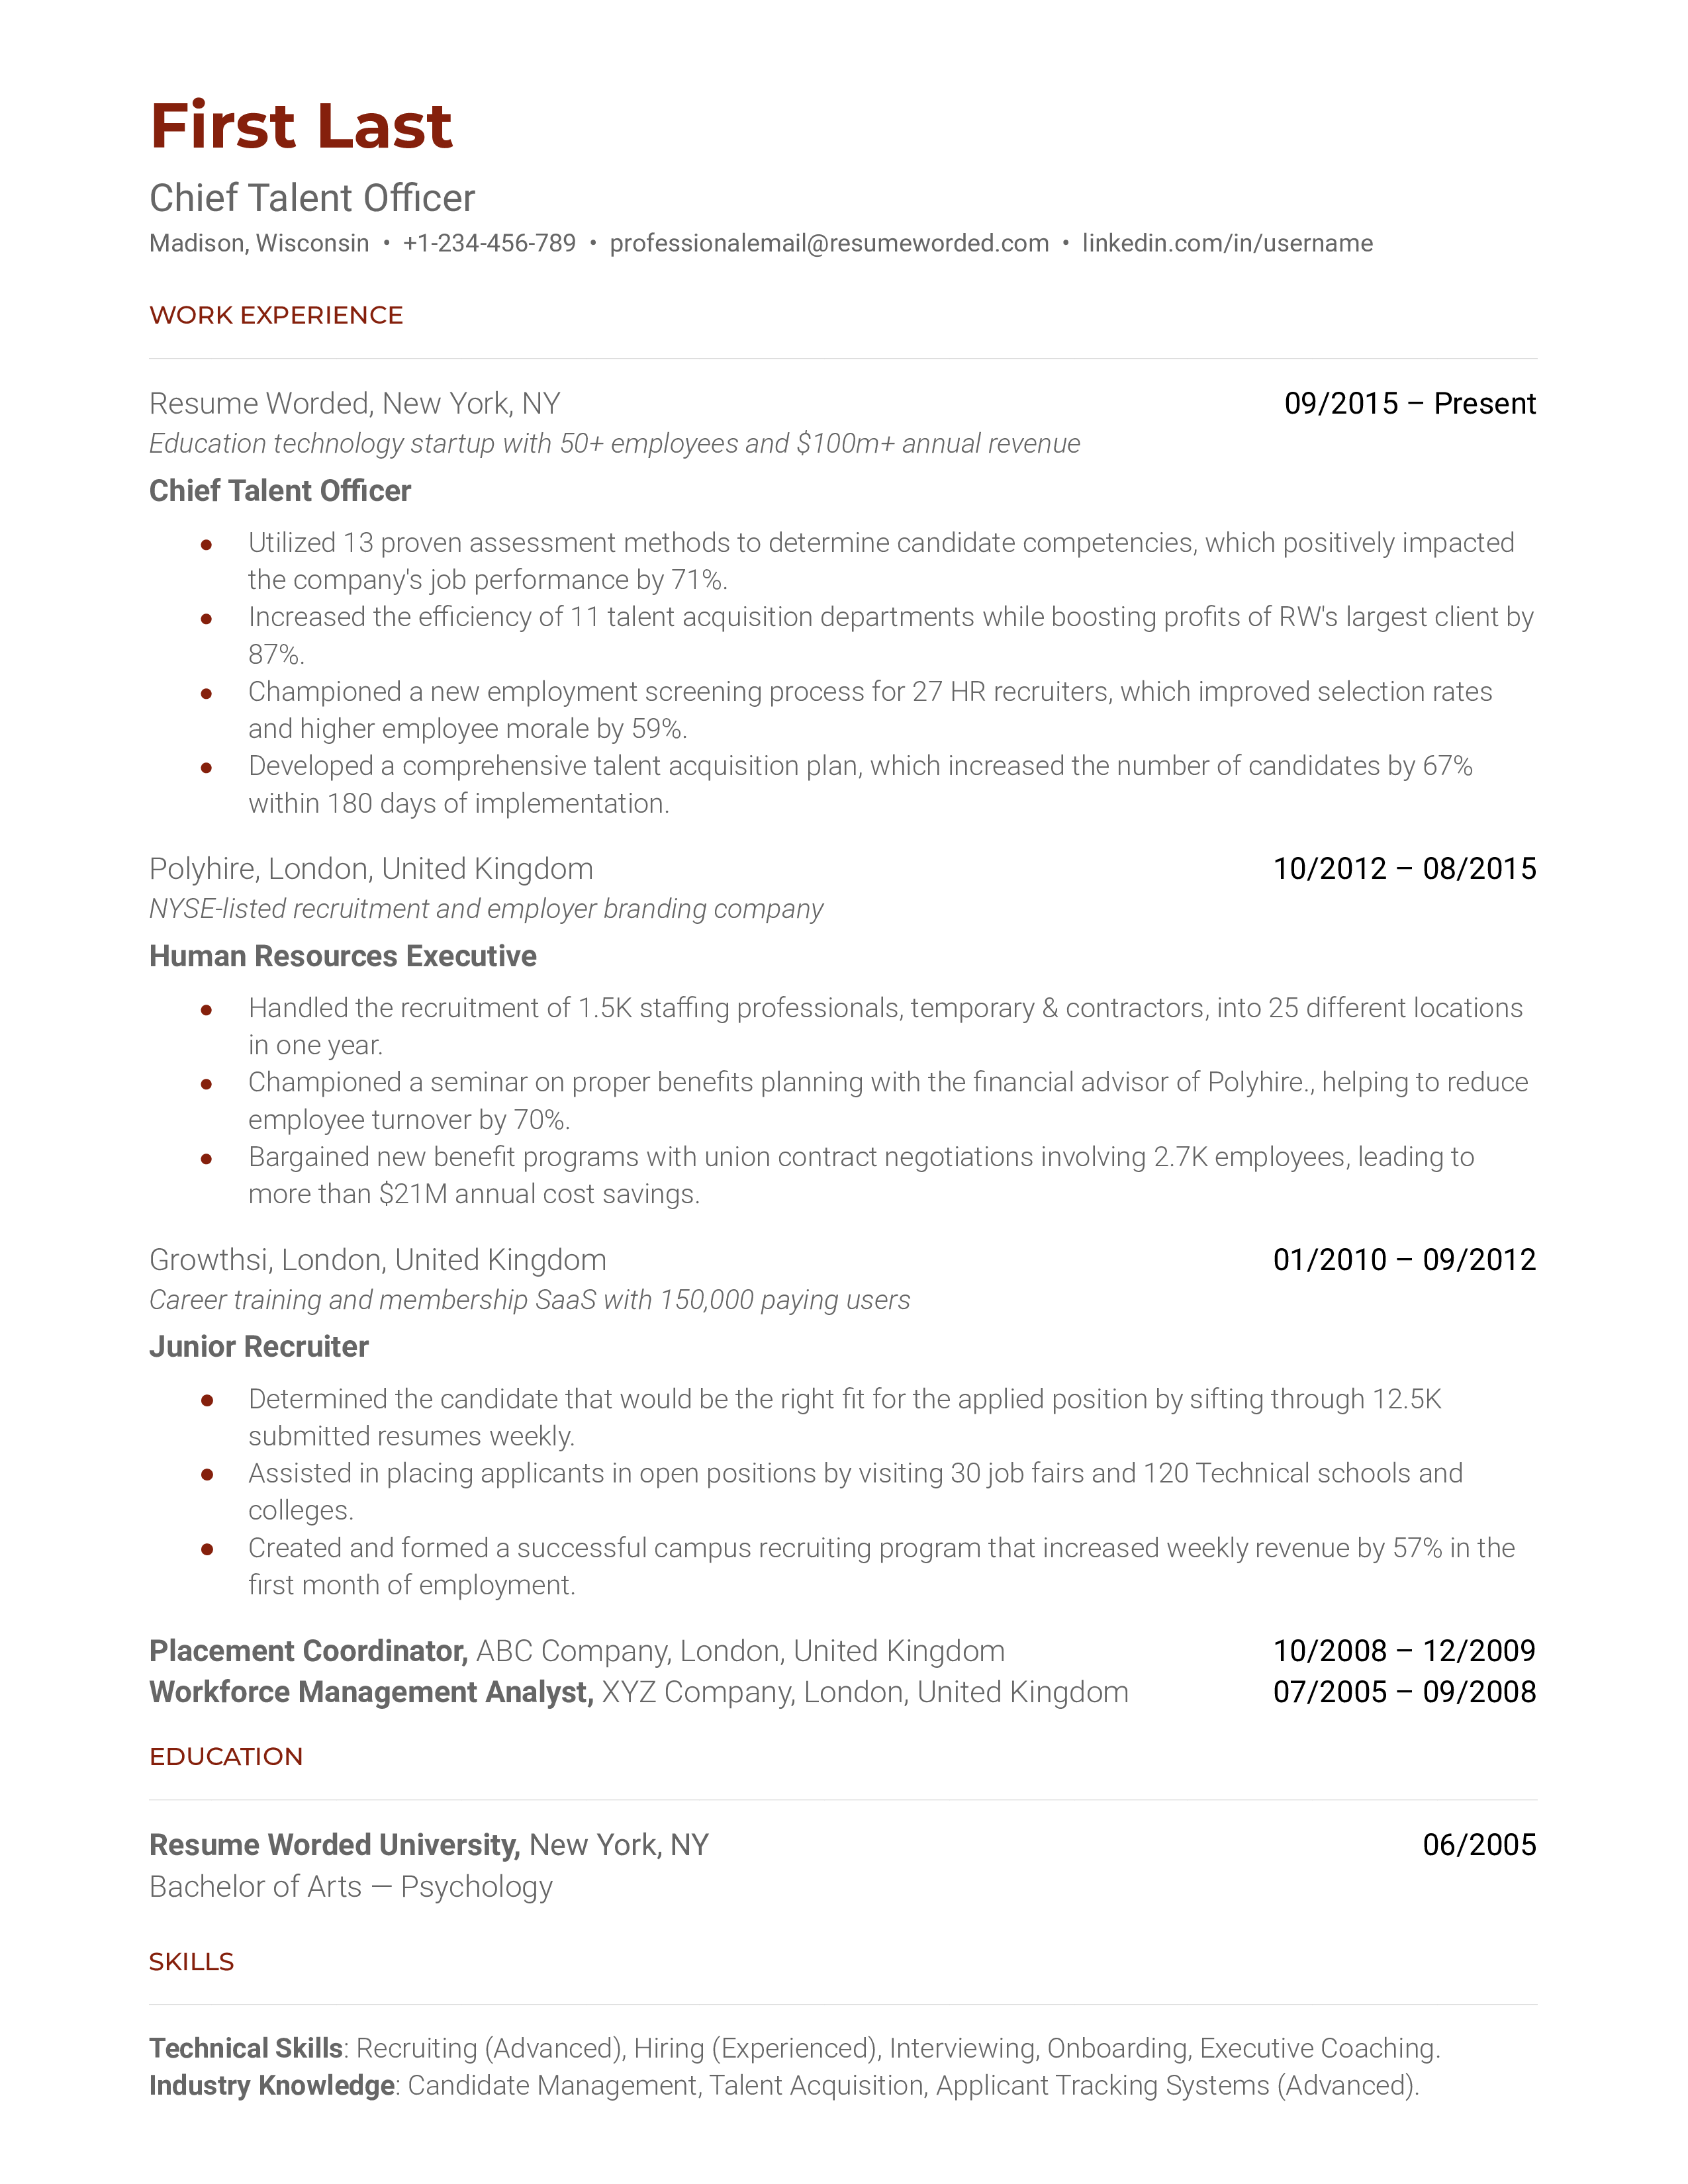 Chief Talent Officer Resume Sample